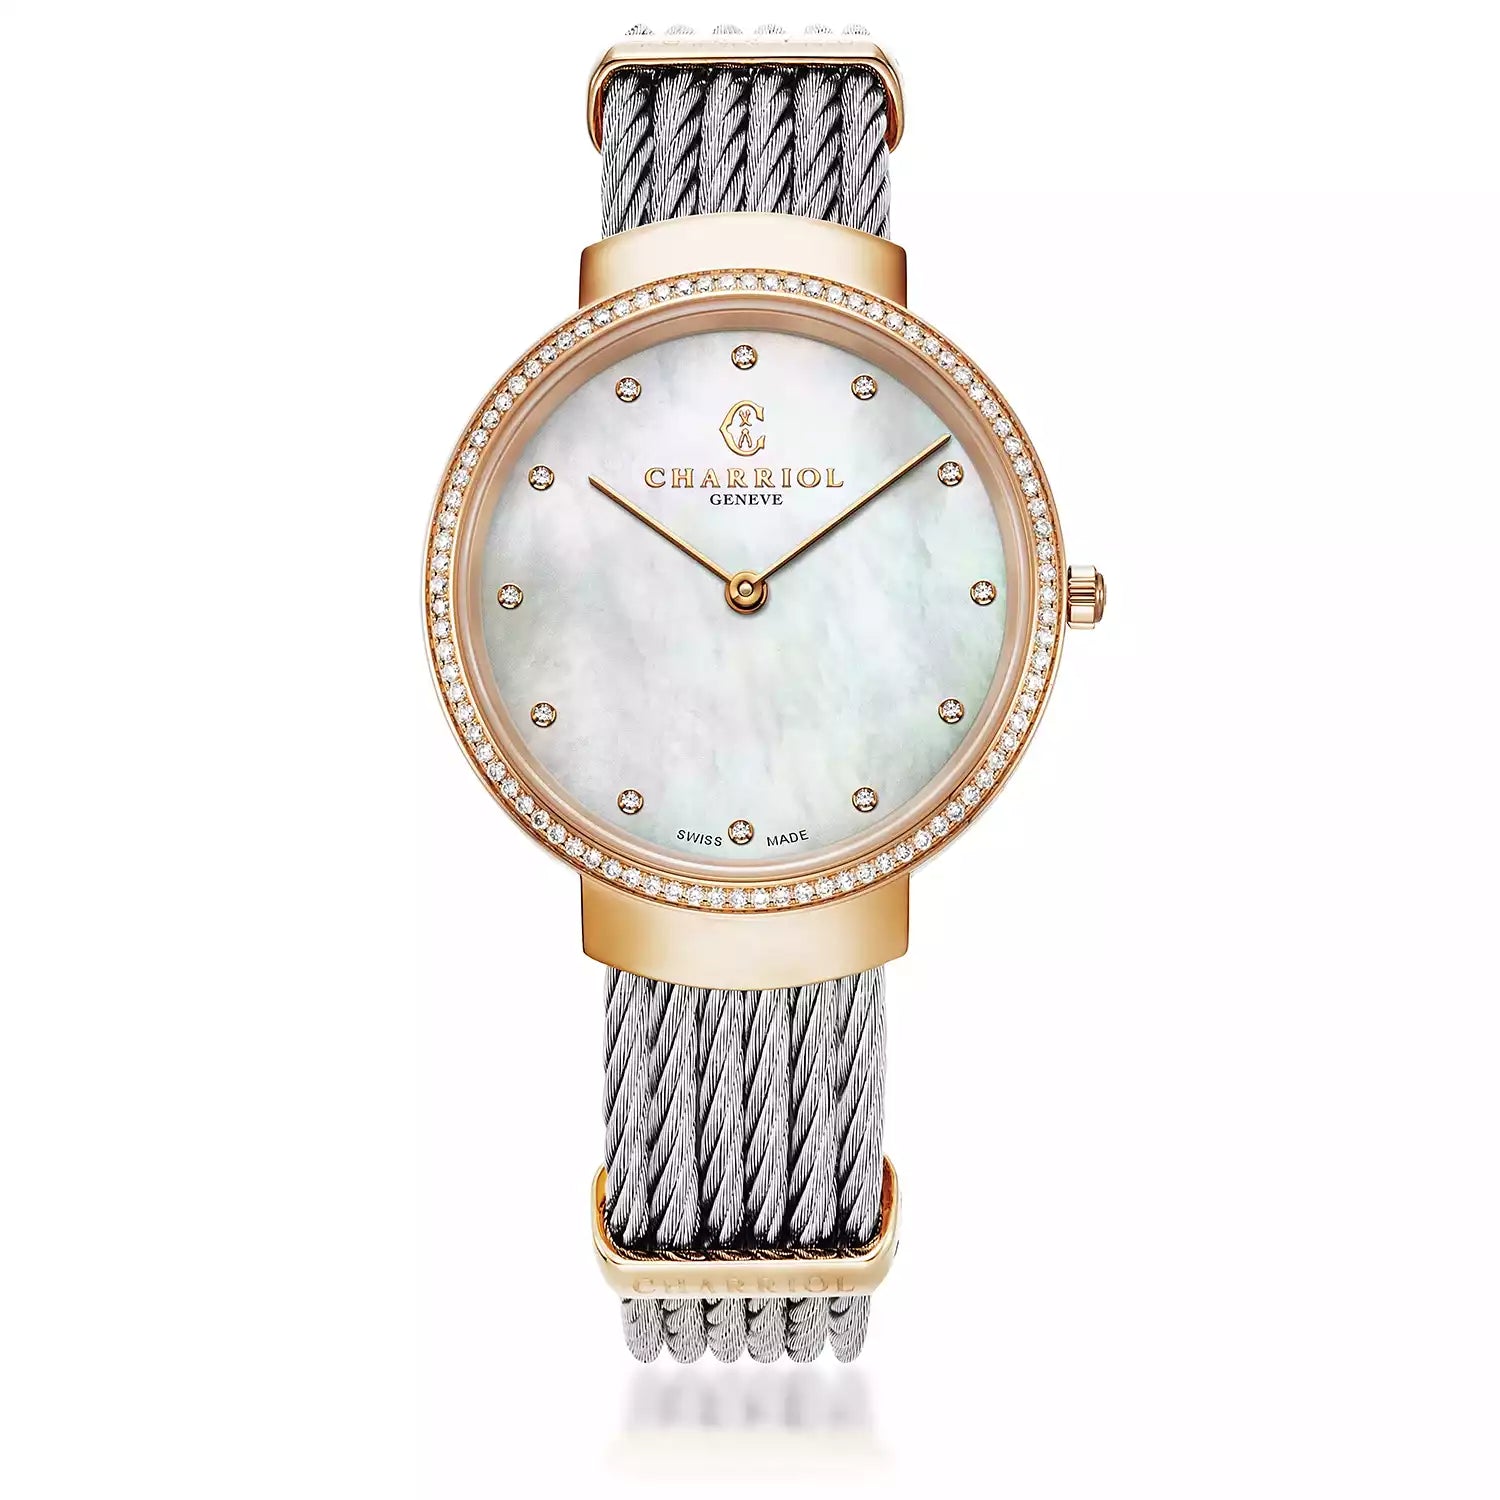 SLIM, 34MM, QUARTZ CALIBRE, WHITE MOTHER OF PEARL DIAL, STEEL ROSE GOLD PVD WITH 88 DIAMONDS BEZEL, STEEL CABLE BRACELET